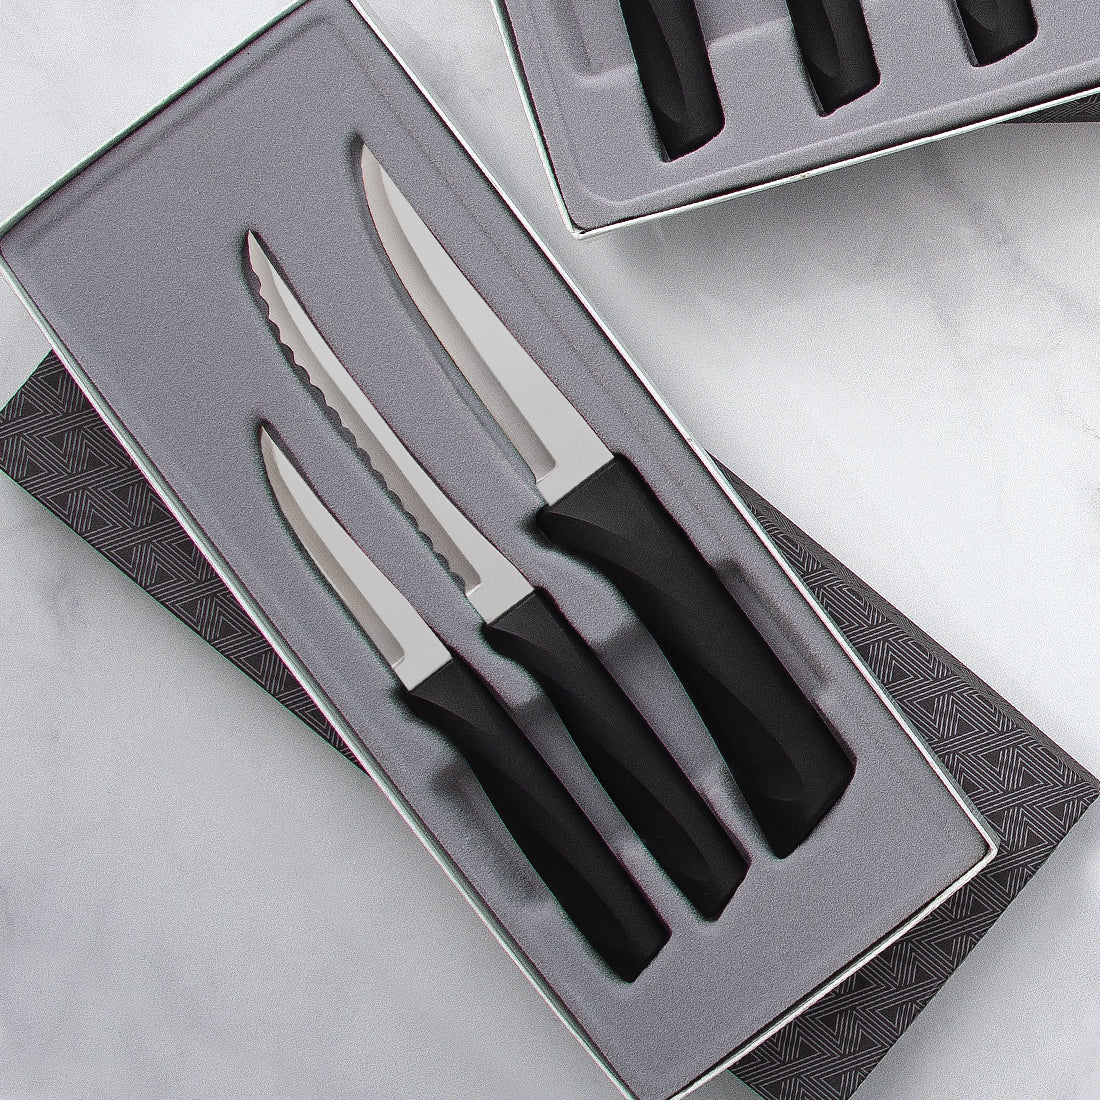 Starfrit Paring Set of 4 Knives with Covers